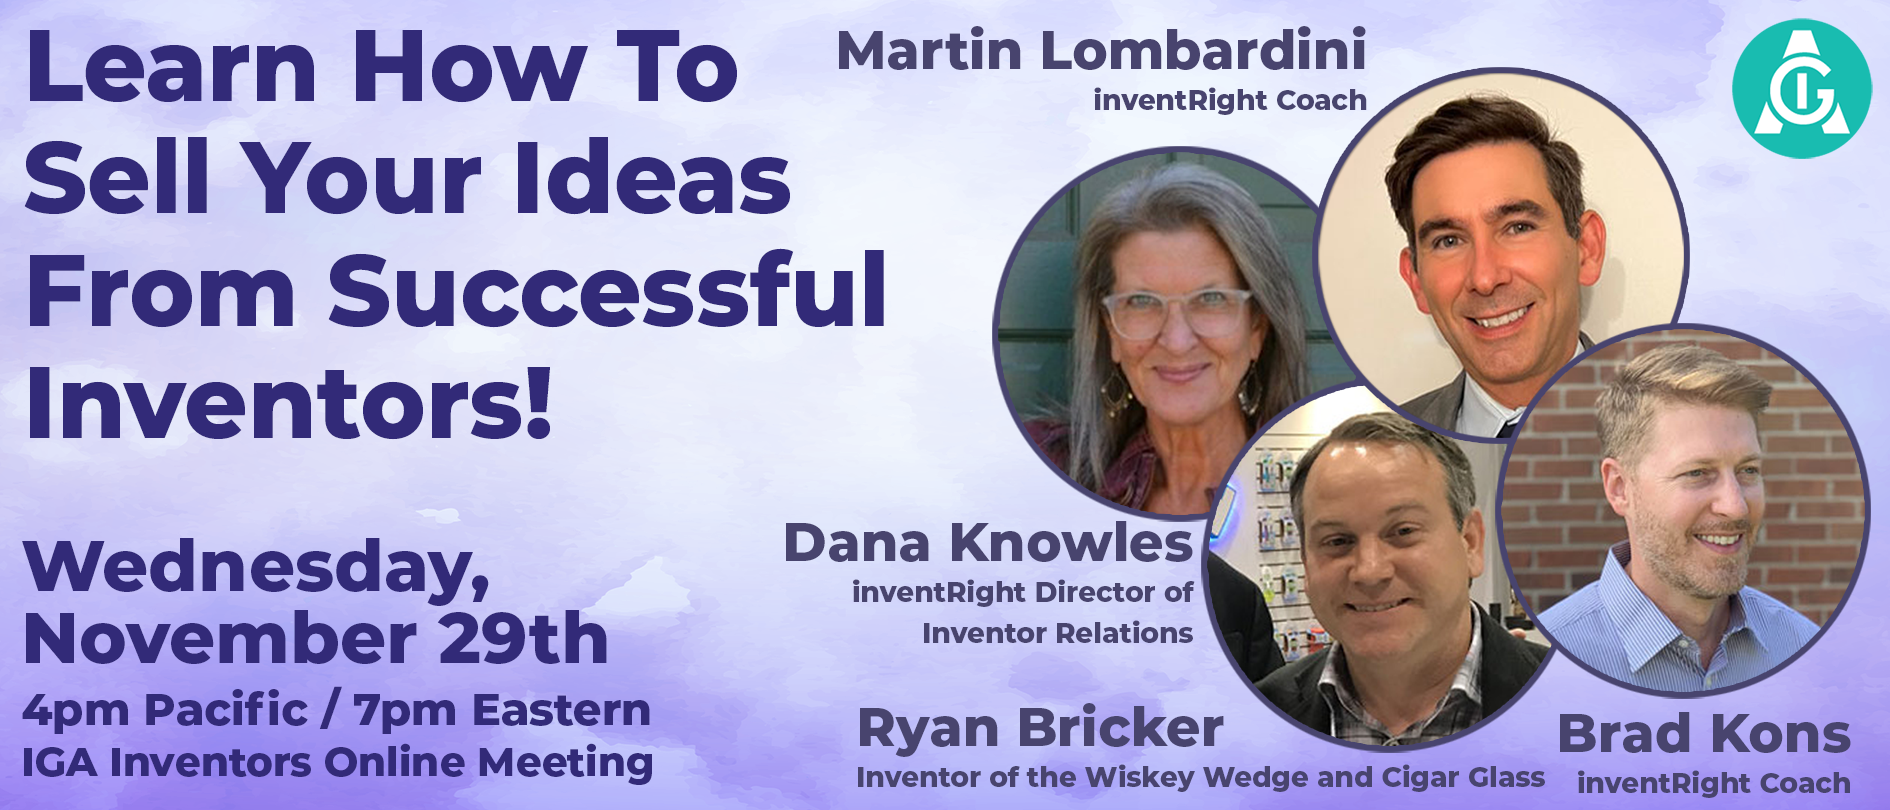 <h3><strong>Learn How To Sell Your Ideas From Sucessful Inventors</strong></h3>